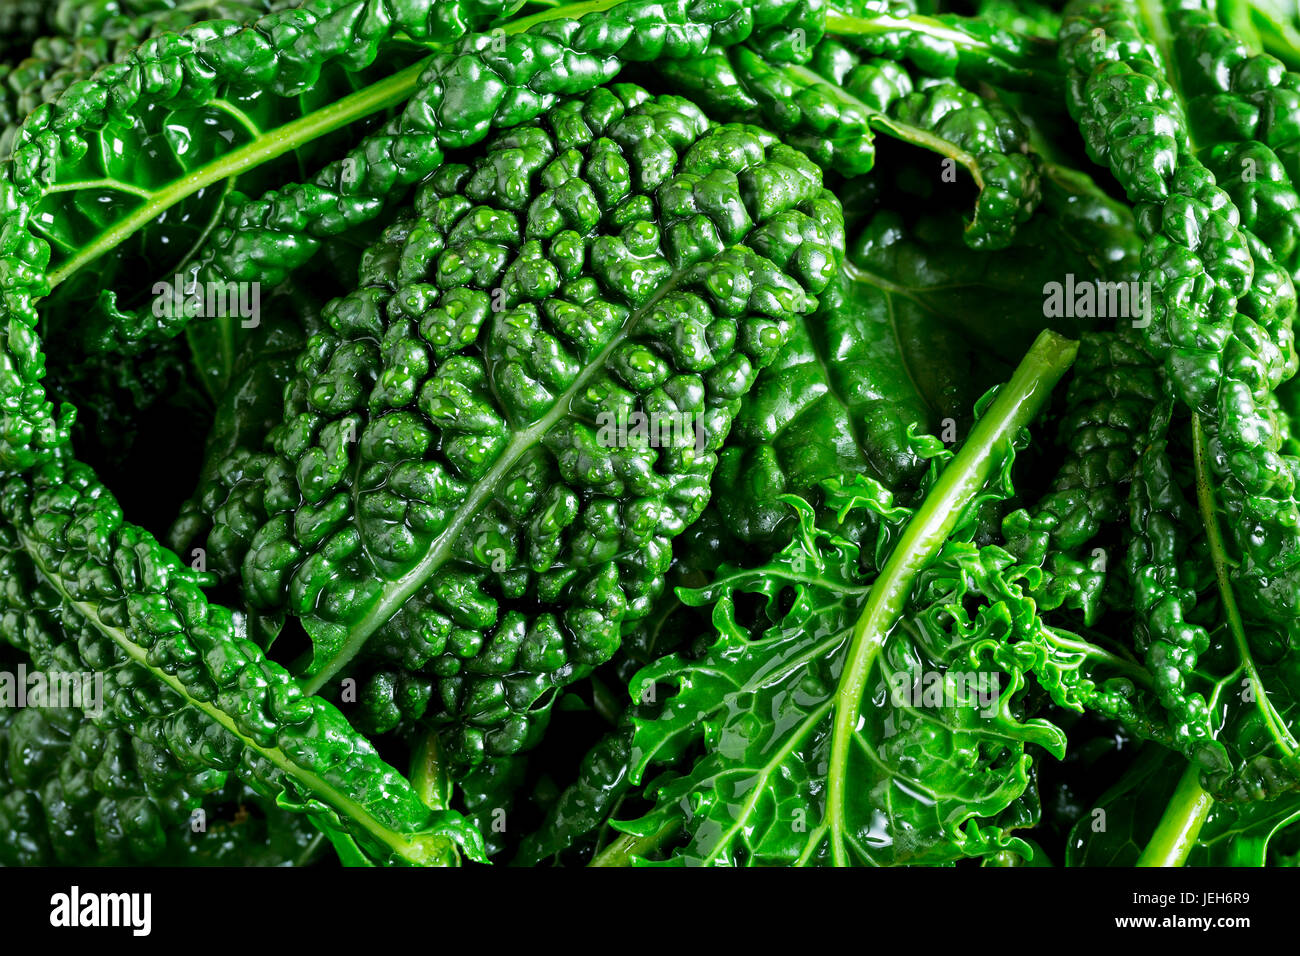 Extreme close-up of kale leaves with water drops; Calgary, Alberta, Canada Stock Photo